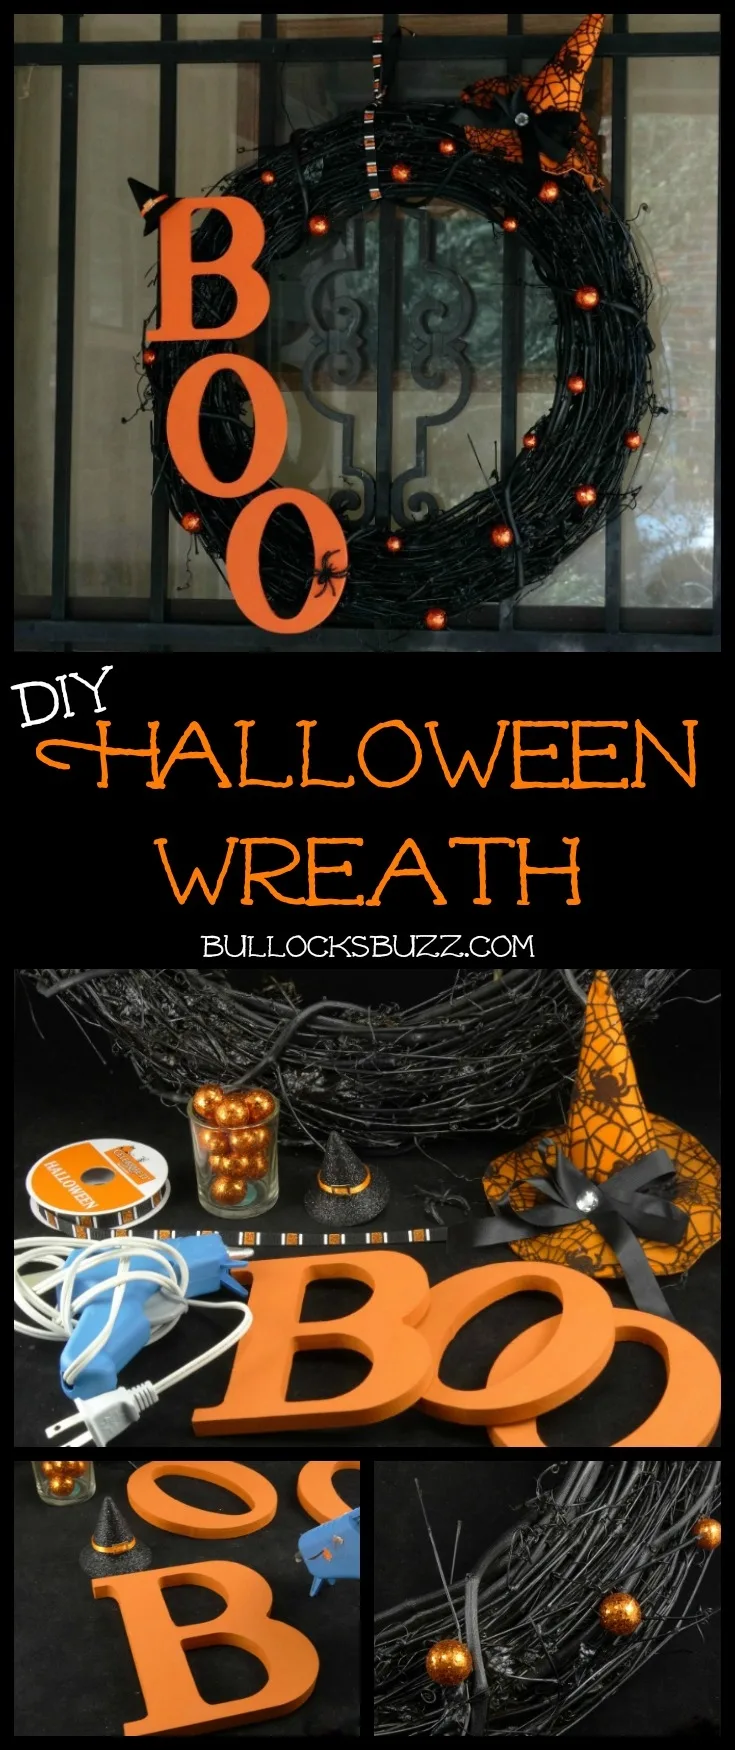 Shockingly spooky and dreadfully fun, this DIY Halloween wreath is the perfect way to get your Halloween off to a screaming start!